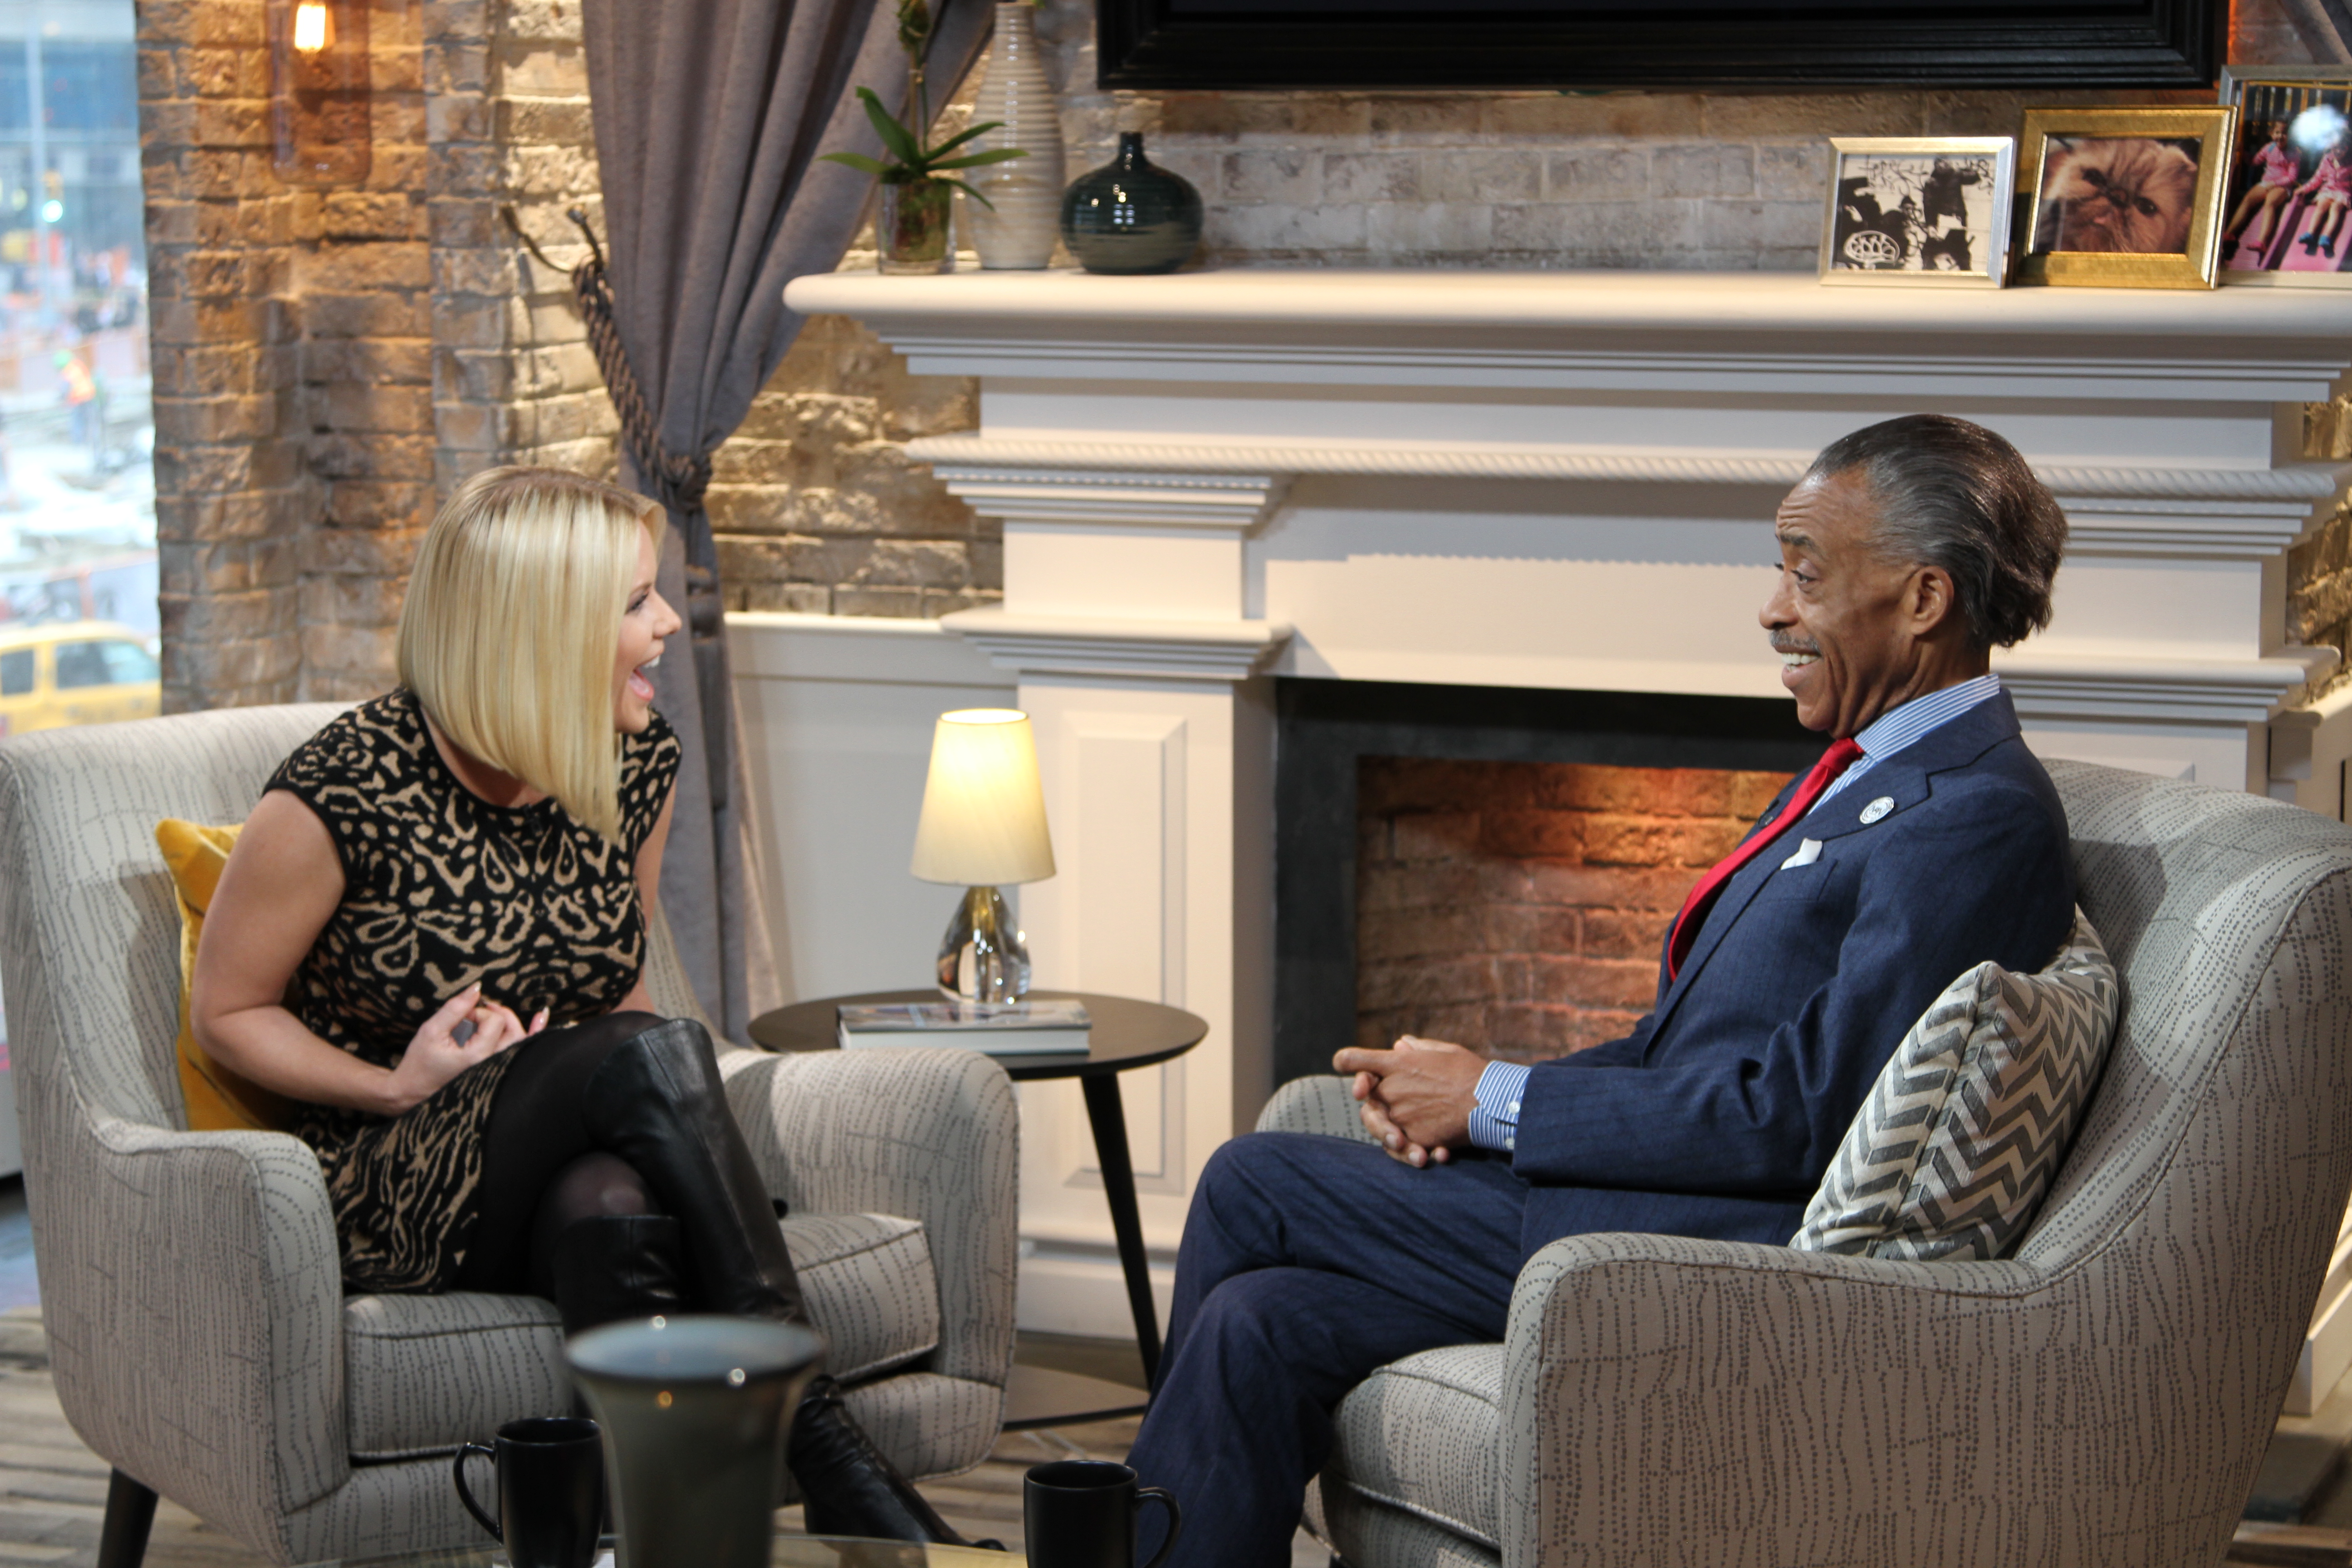 Carrie Keagan with Reverend Al Sharpton on the set of VH1's Big Morning Buzz Live with Carrie Keagan